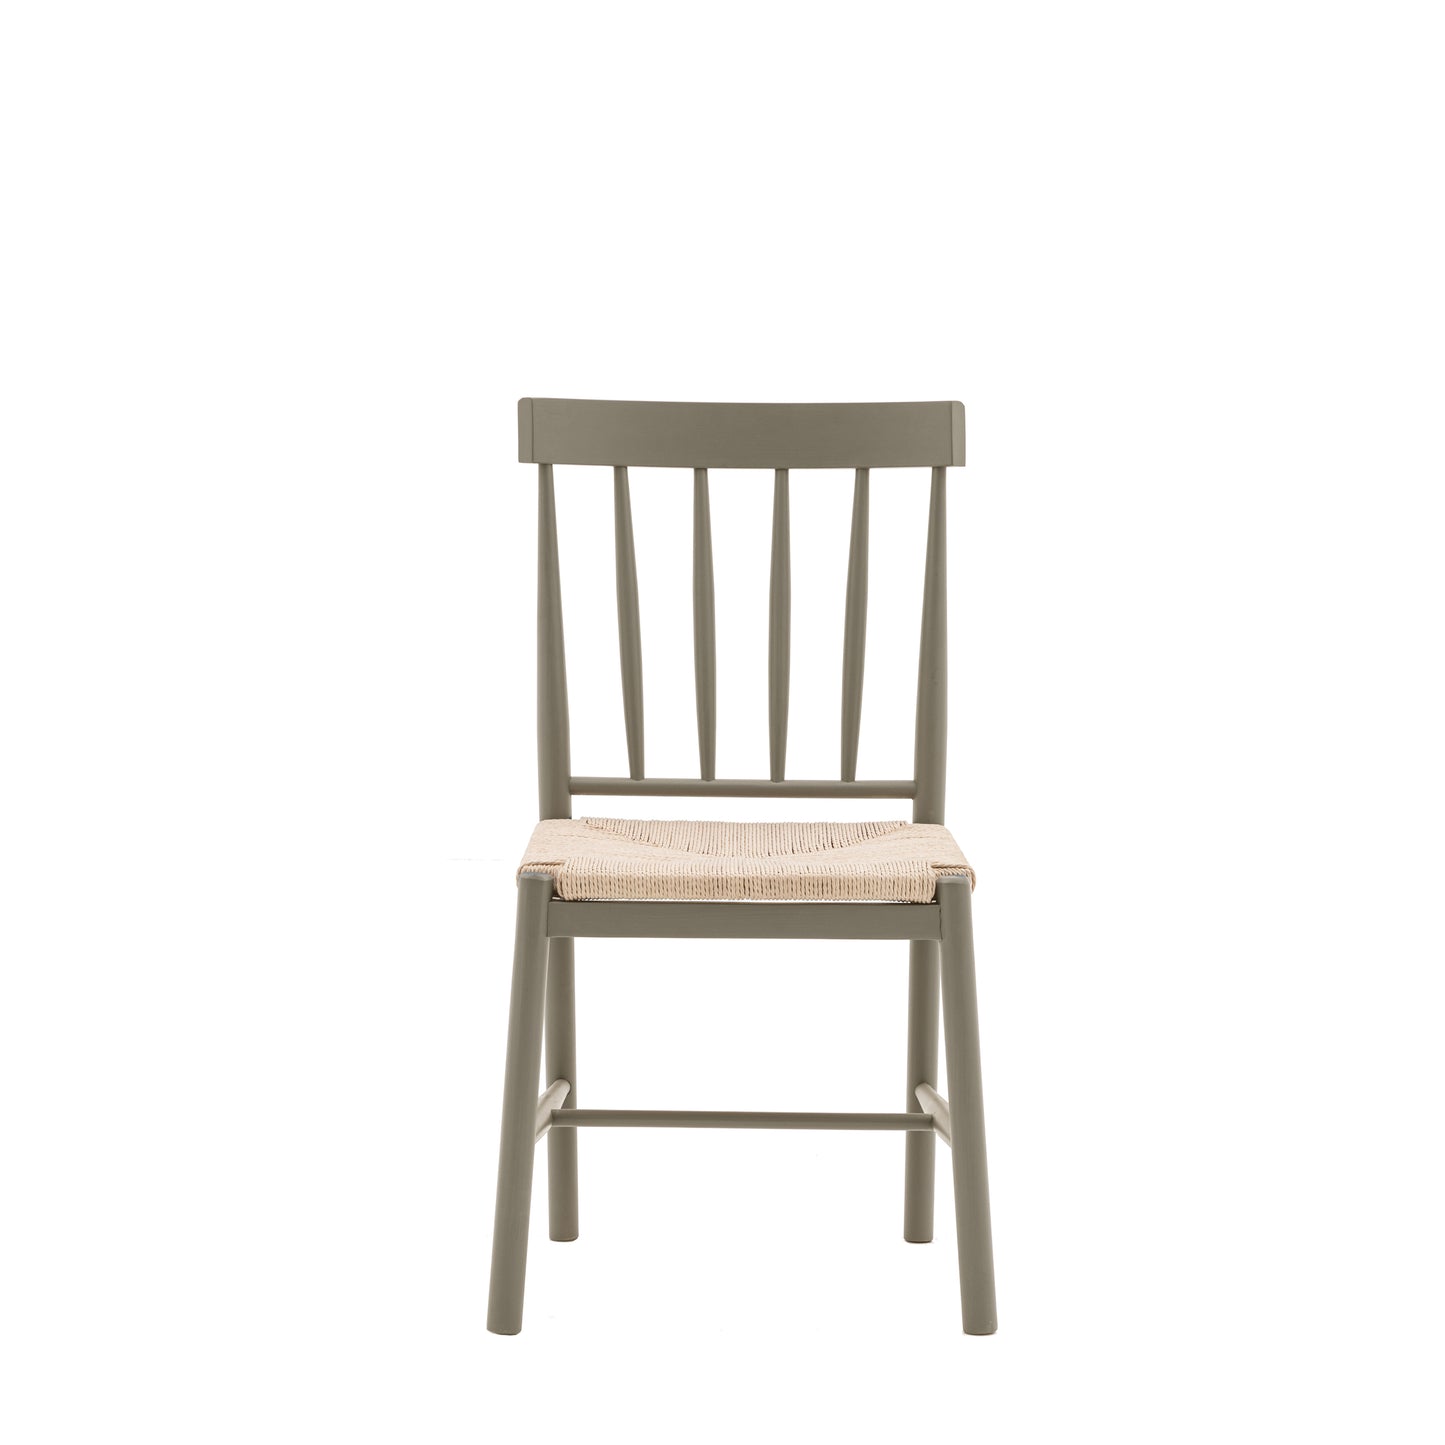 A Buckland Dining Chair 2pk in Prairie from Kikiathome.co.uk with a wooden seat against a white background, perfect for interior decor and home furniture.